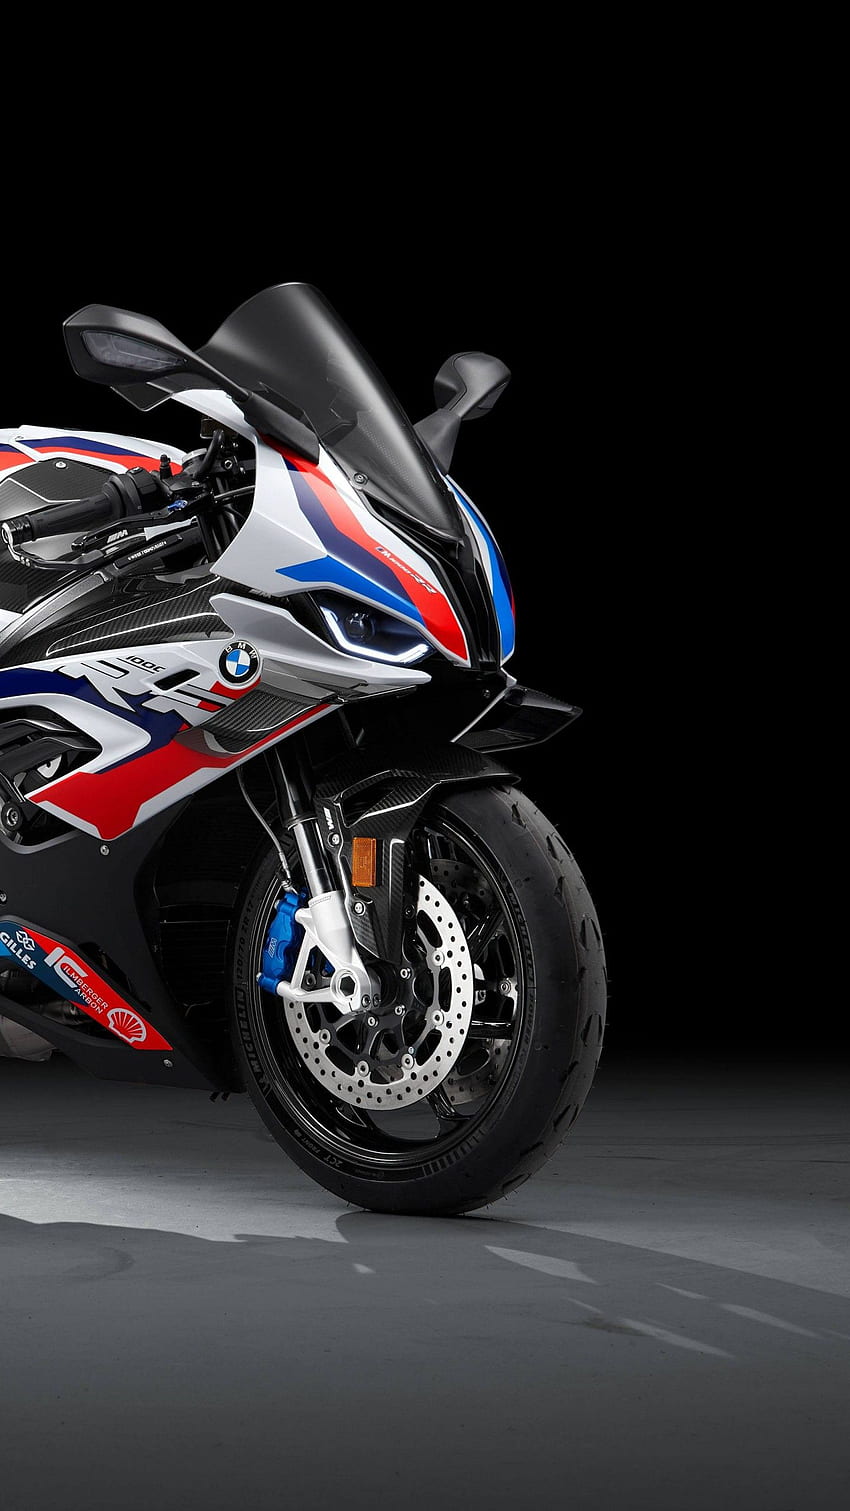 24189 BMW S1000RR 4K, Motorcycle, BMW S1000RR - Rare Gallery HD Wallpapers